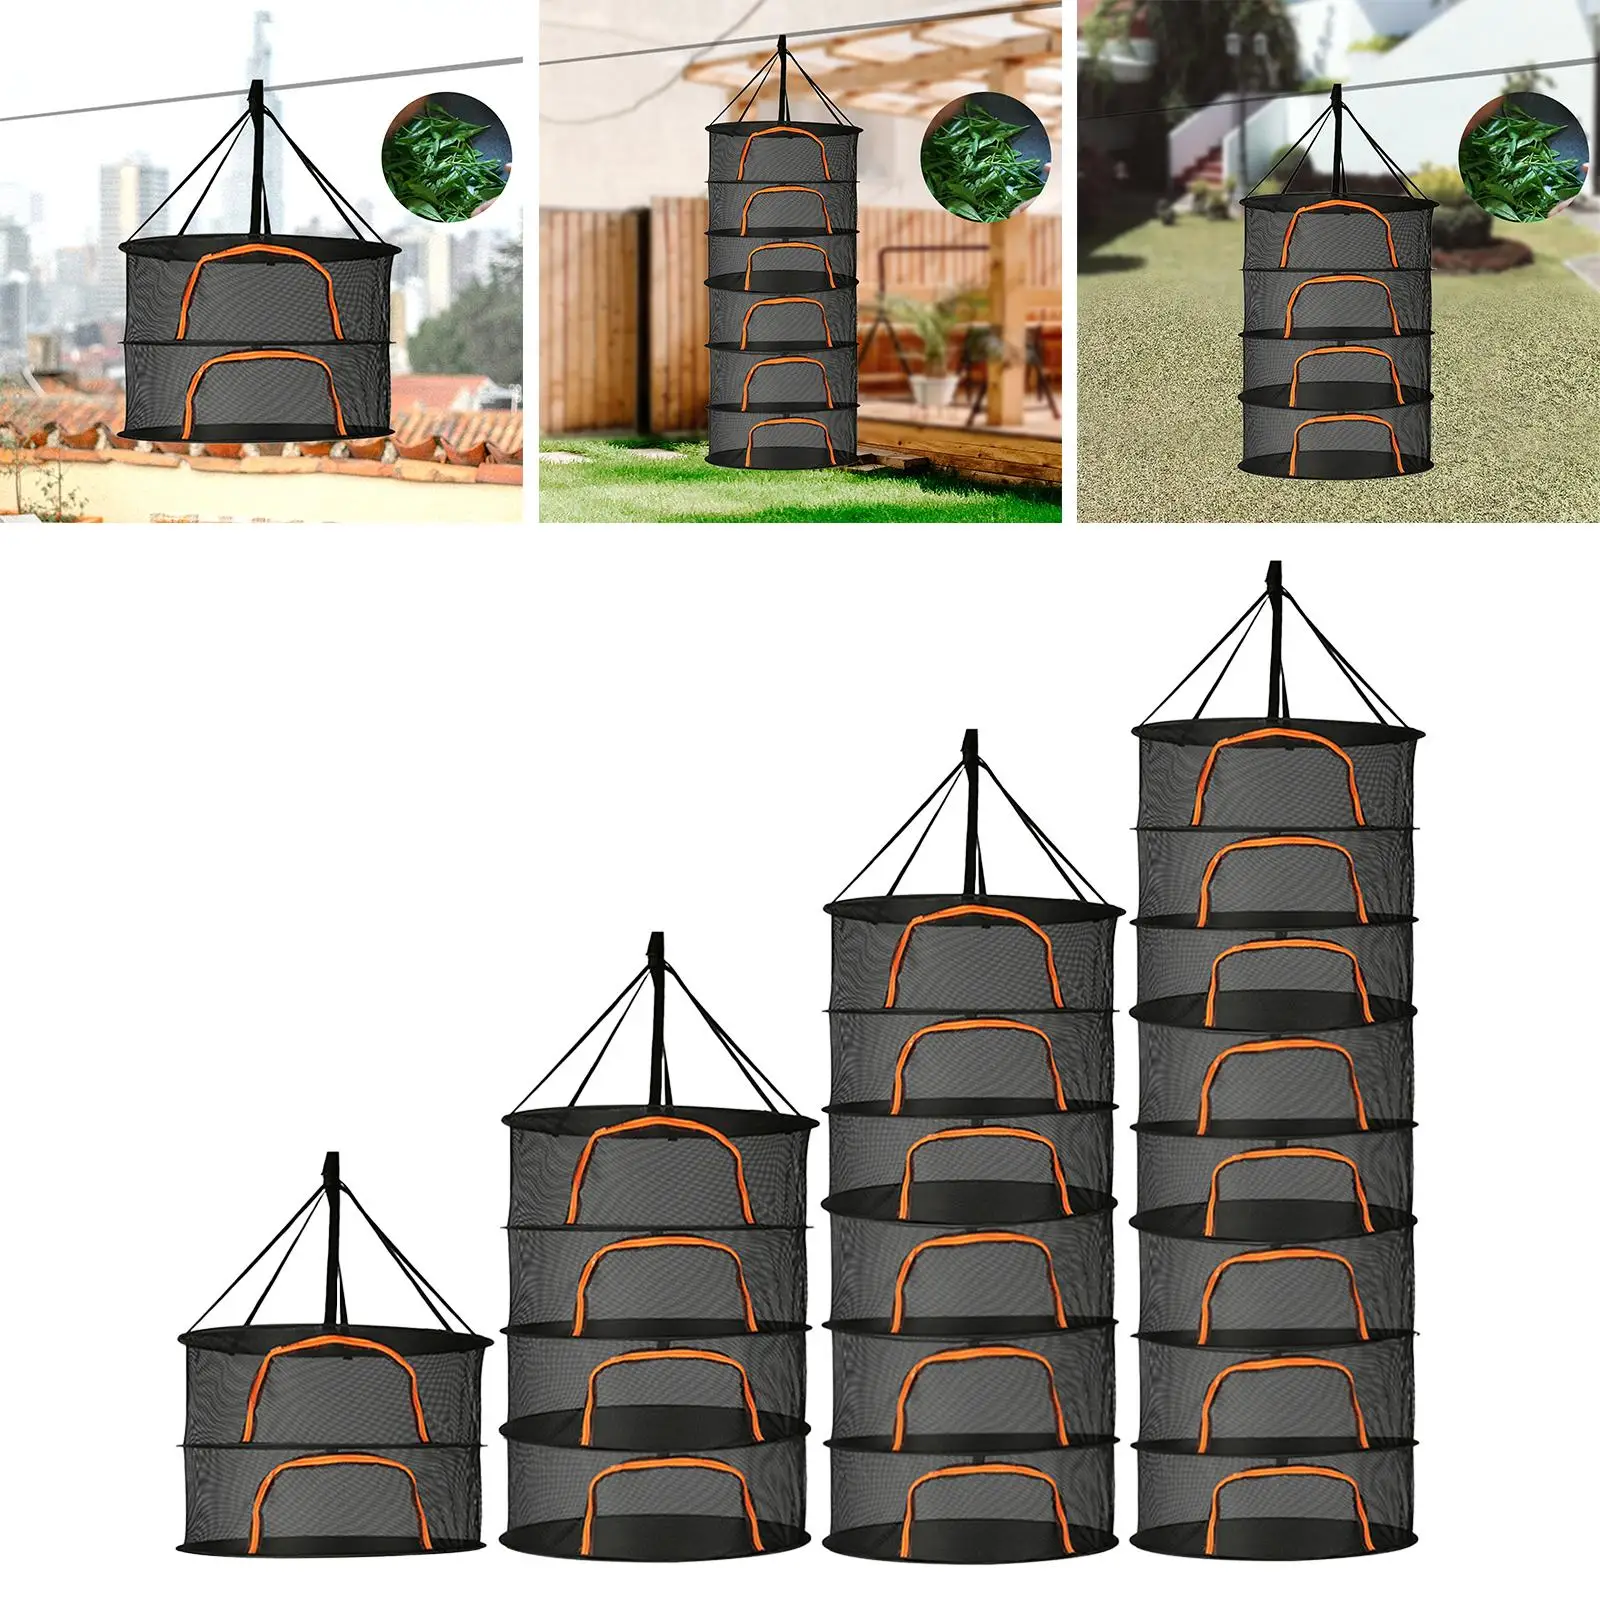 Plants Drying Rack, Hanging Drying Fish Net Breathable Collapsible Mesh Hanging Plant Dryer Drying Net for Fruits, Vegetables